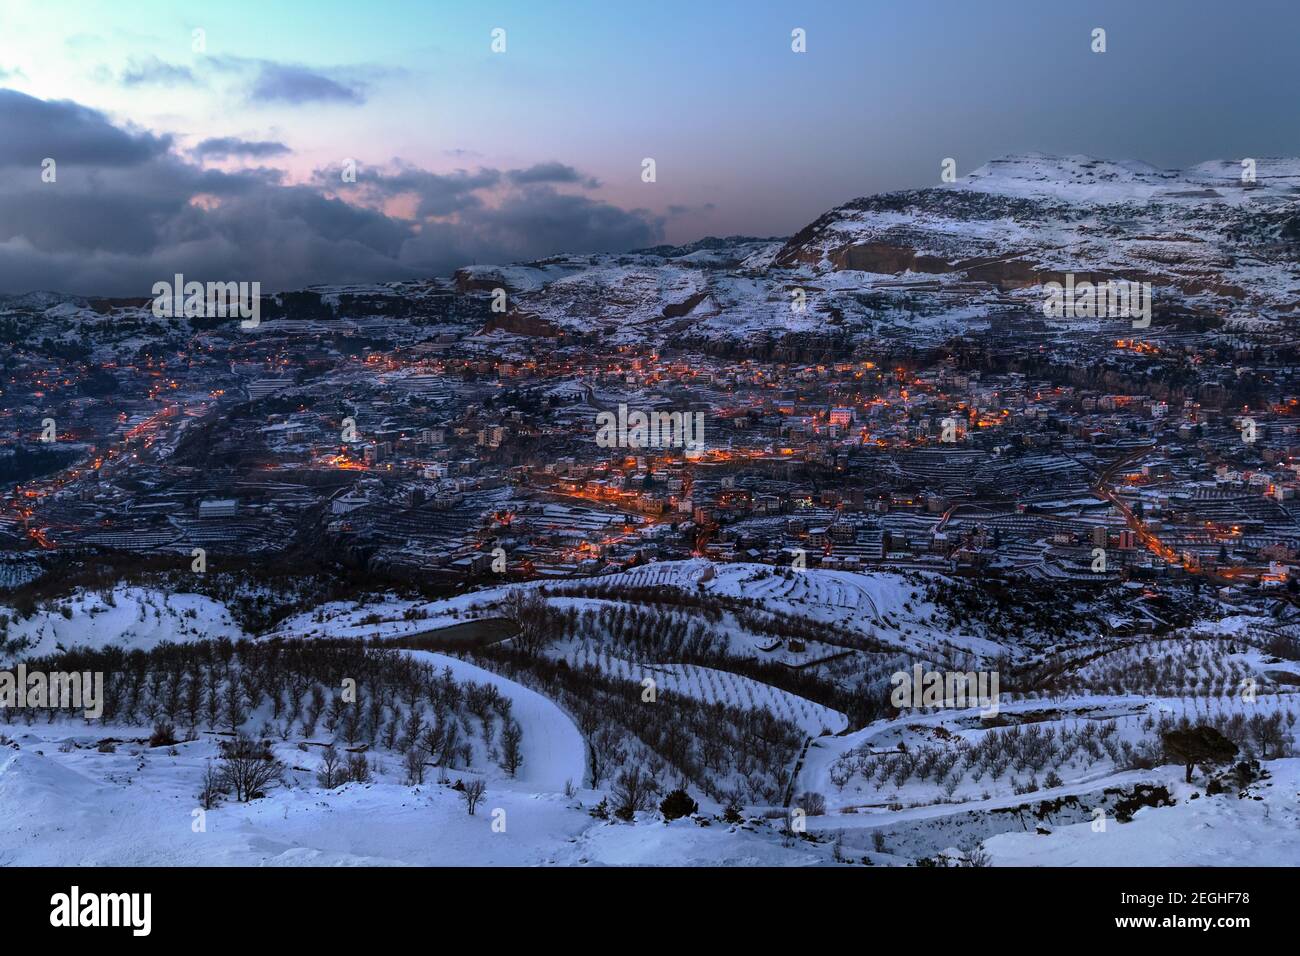 Amazing Landscape of a Little Mountainous Town at the Evening. Winter Vacation in Faraya. Lebanon. Stock Photo